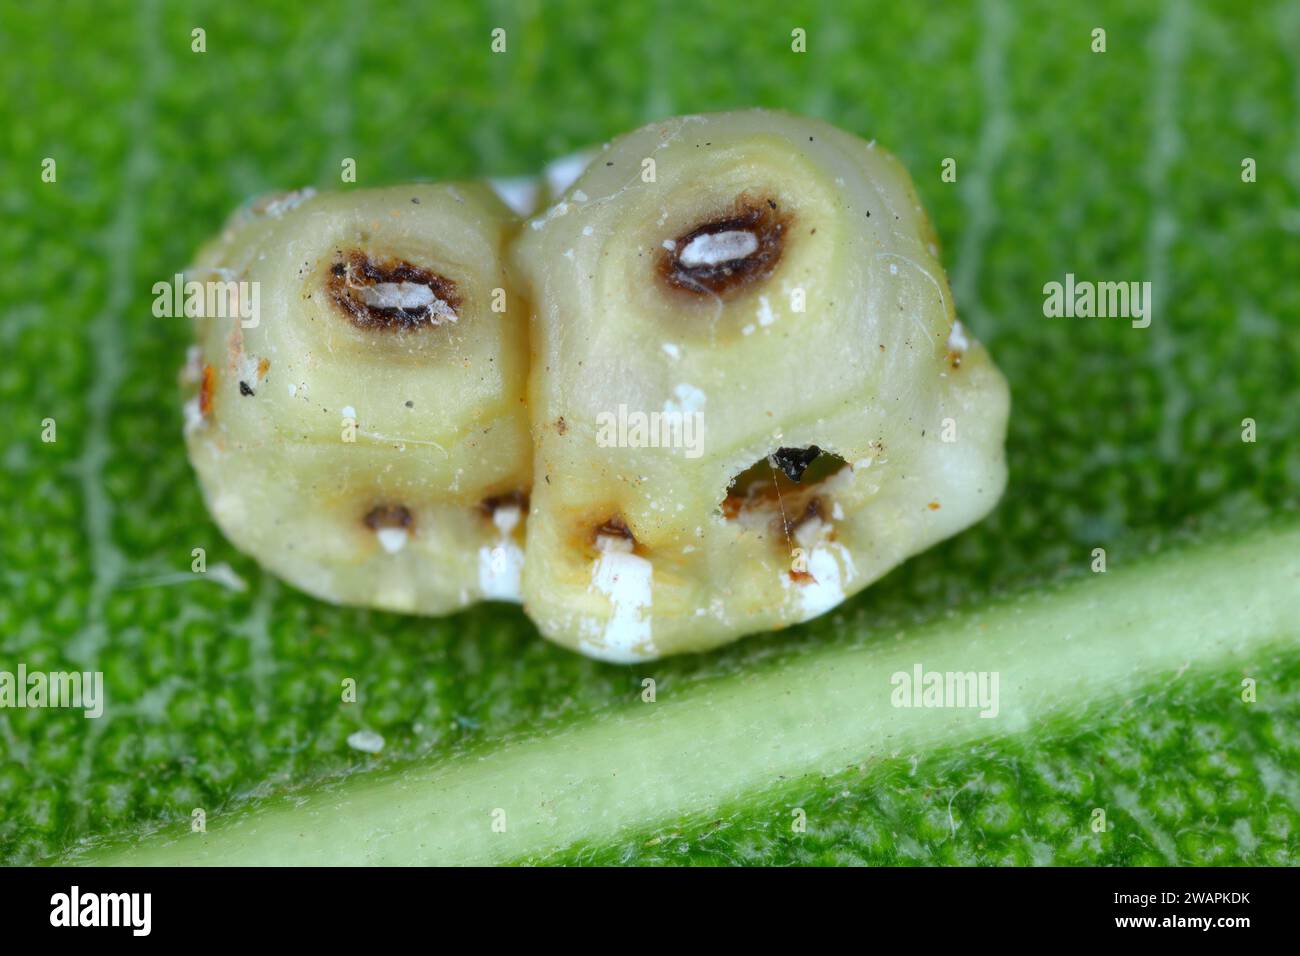 Fig wax scale (scientific name: Ceroplastes rusci, Coccidae). Insect reported as a significant pest of citrus and many other crops and ornamental Stock Photo